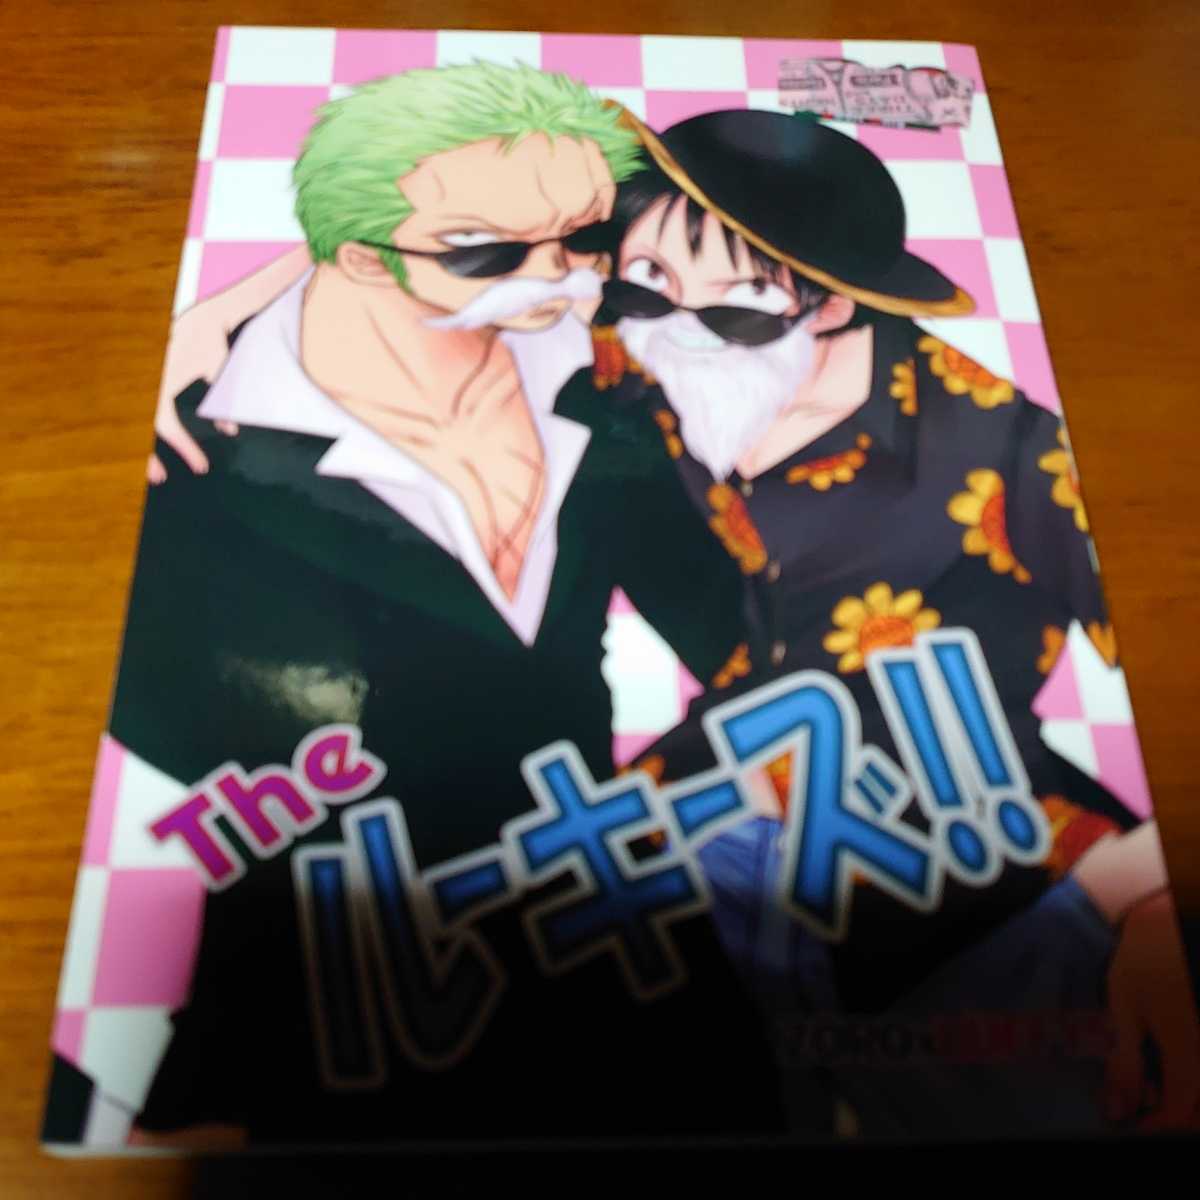 One Piece ワンピース 同人誌 The ルーキーズ めめりん様 にこいち 万里 瞳 様 Zlwv ゾロ ルフィ ゾロル 小説 Product Details Yahoo Auctions Japan Proxy Bidding And Shopping Service From Japan